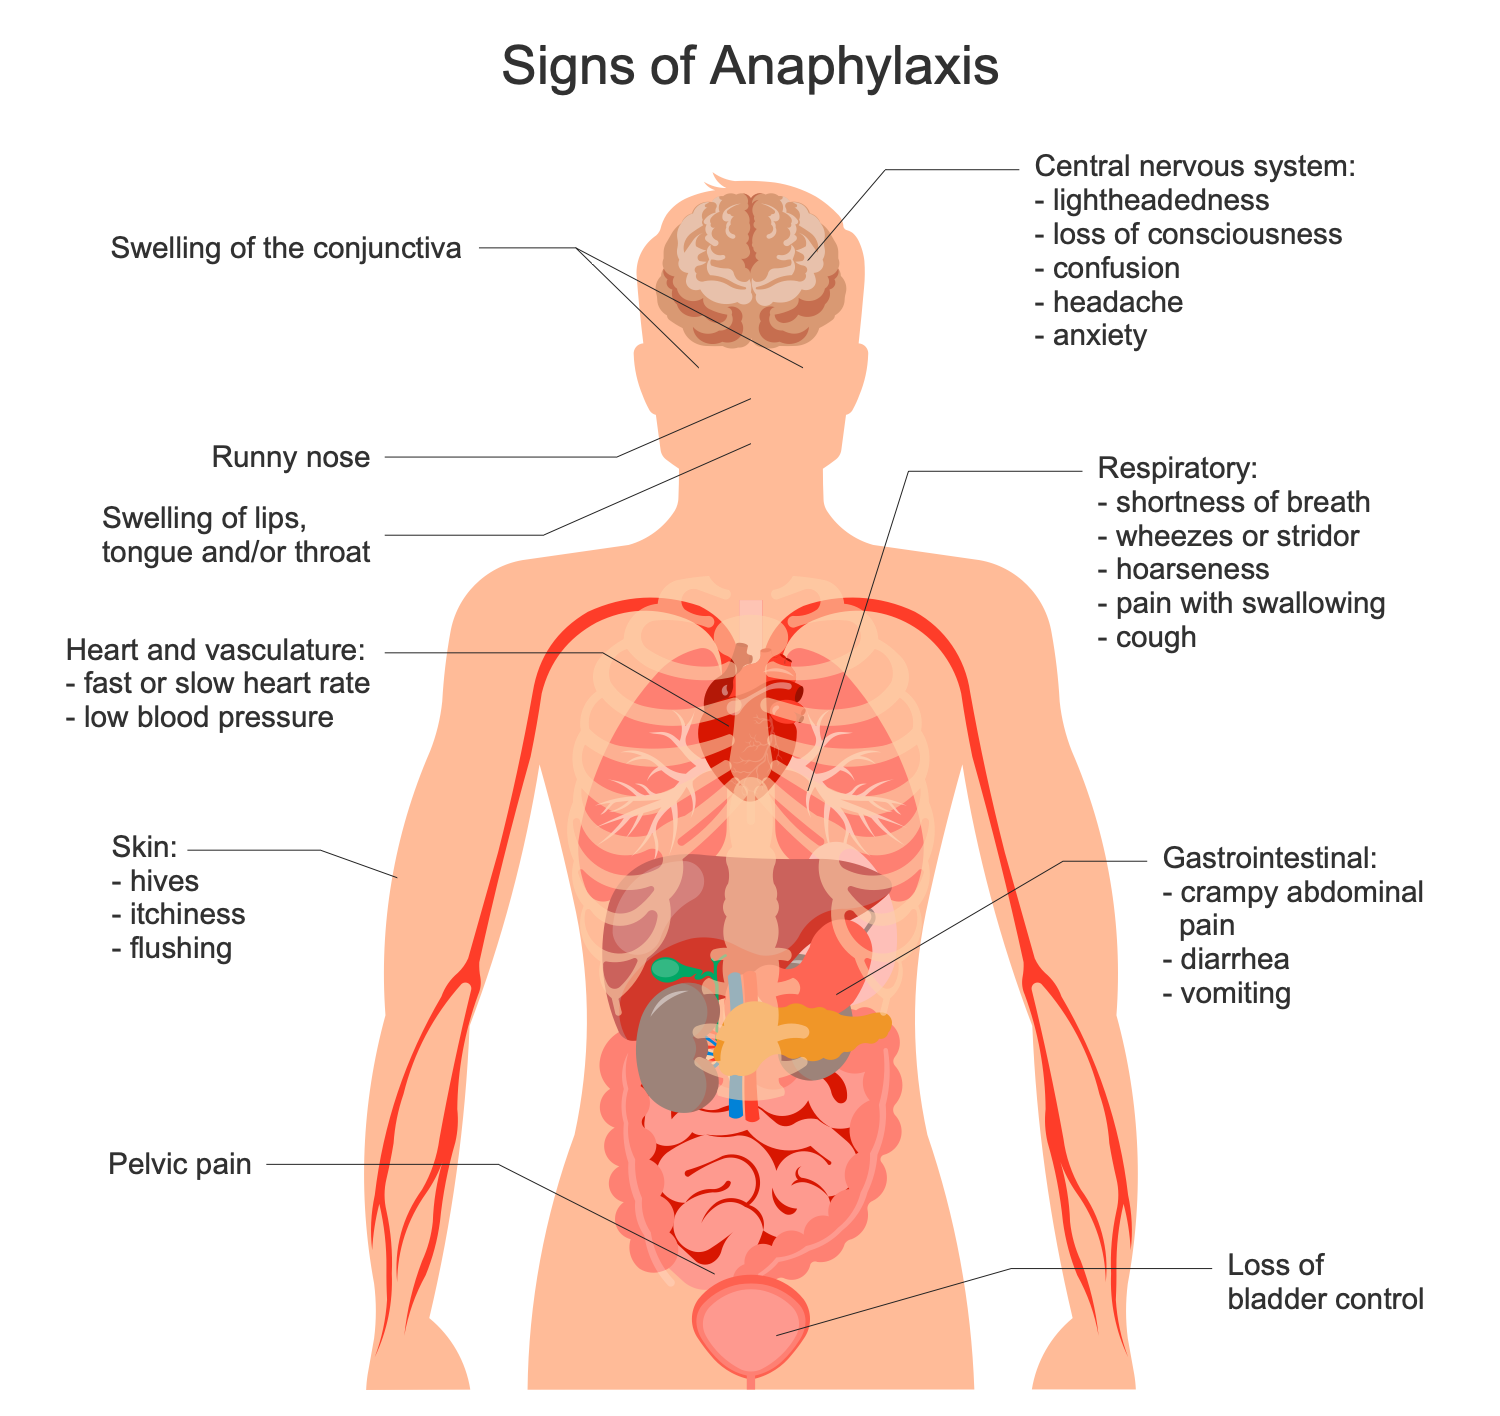 Signs of Anaphylaxis